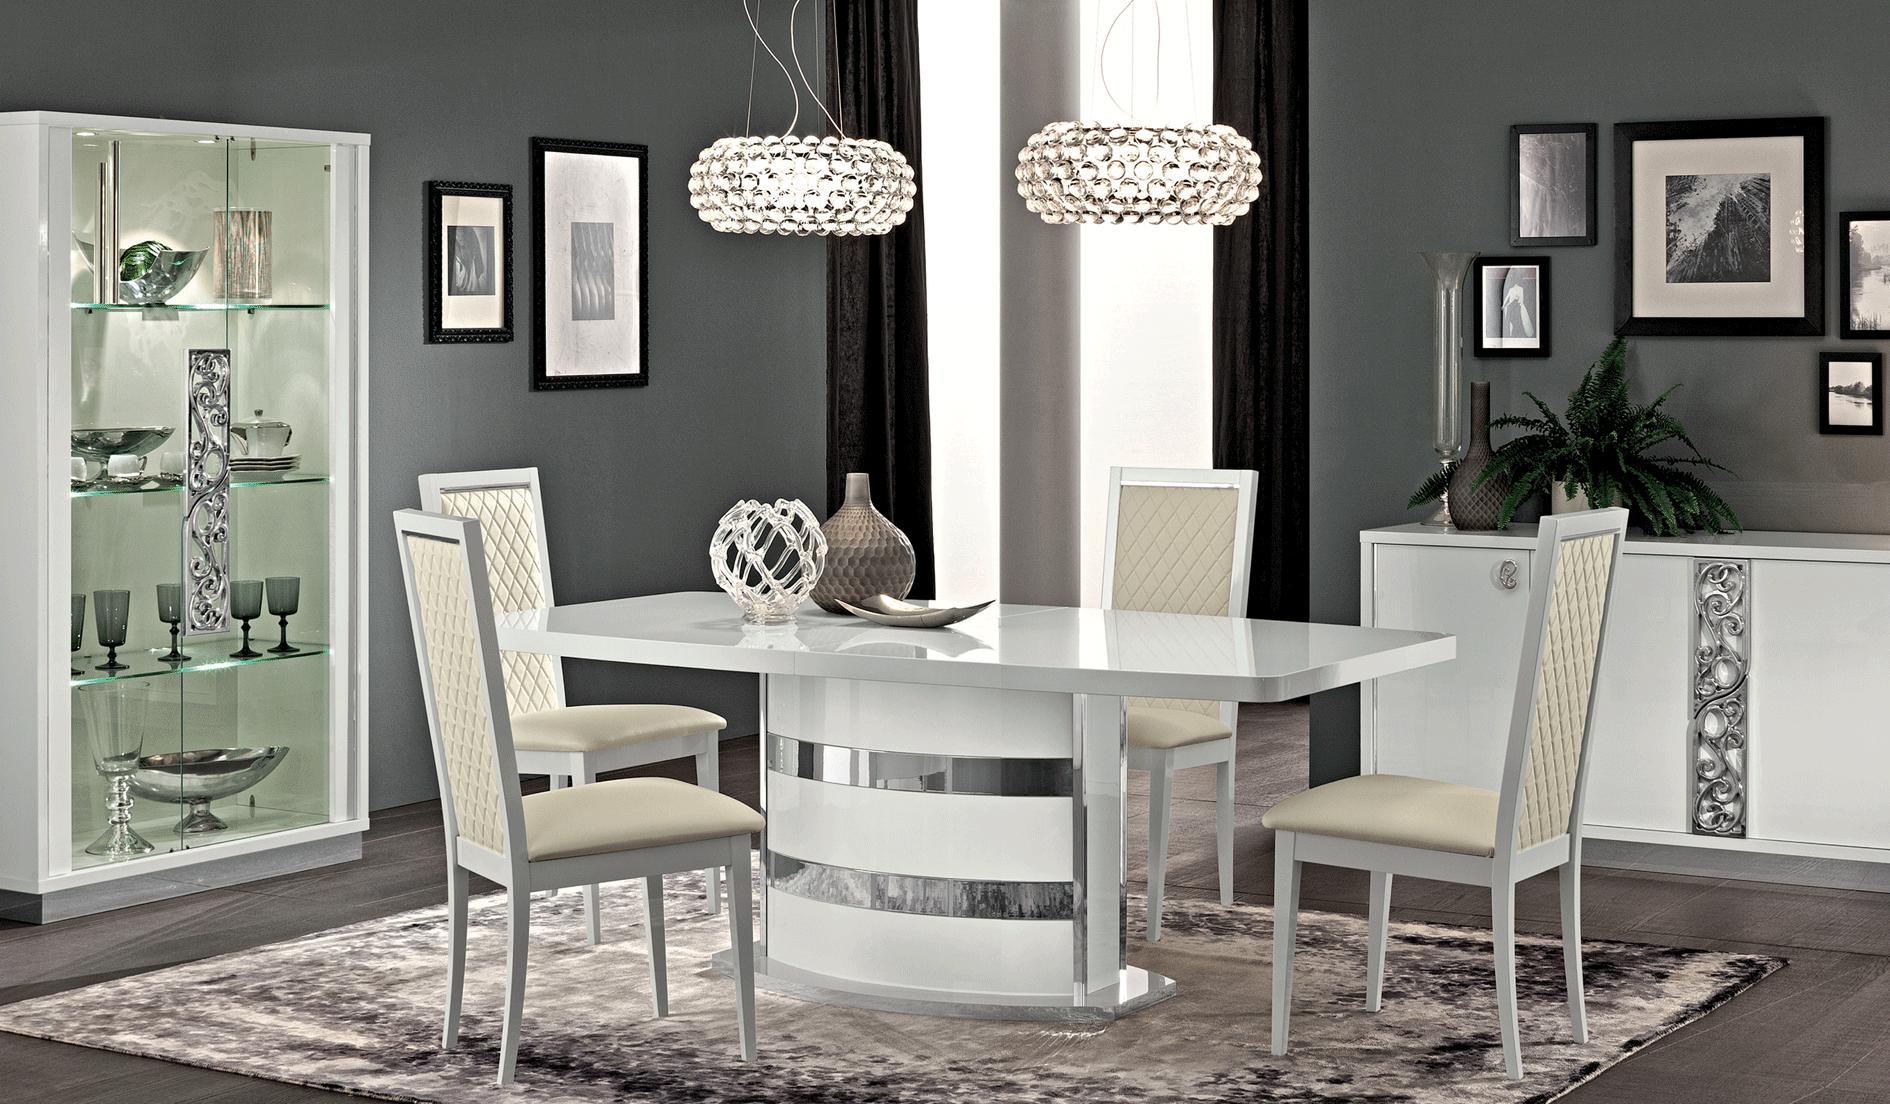 

    
Dining Room Set 9 Pcs High Gloss Pure White Contemporary Made in Italy ESF Roma  13165
